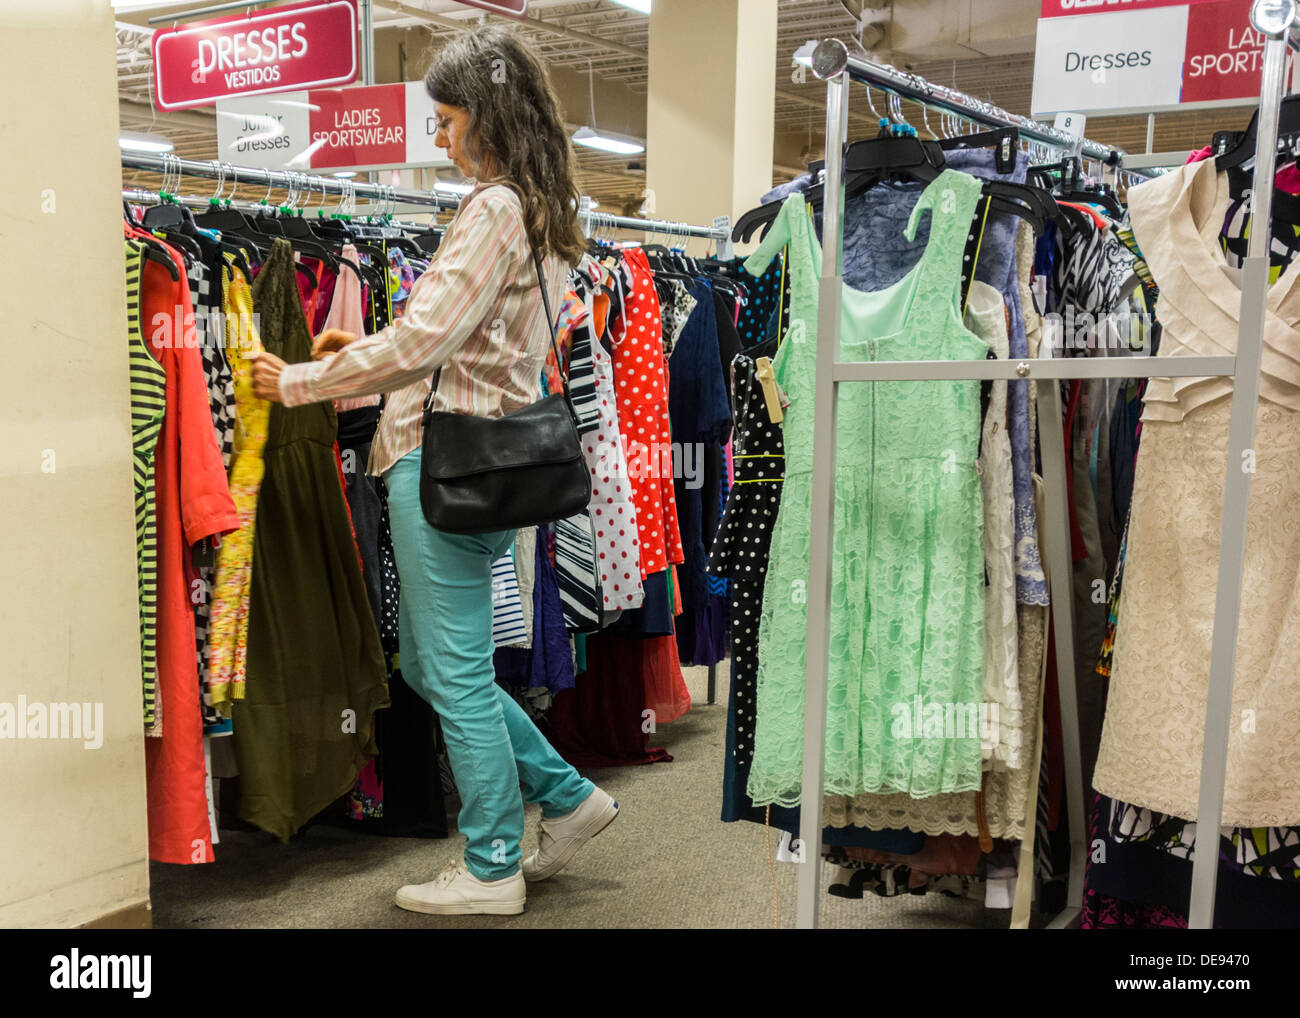 A woman browses a rack of dresses on sale in a discount department store in Oklahoma City, Oklahoma City, Oklahoma, USA. Stock Photo